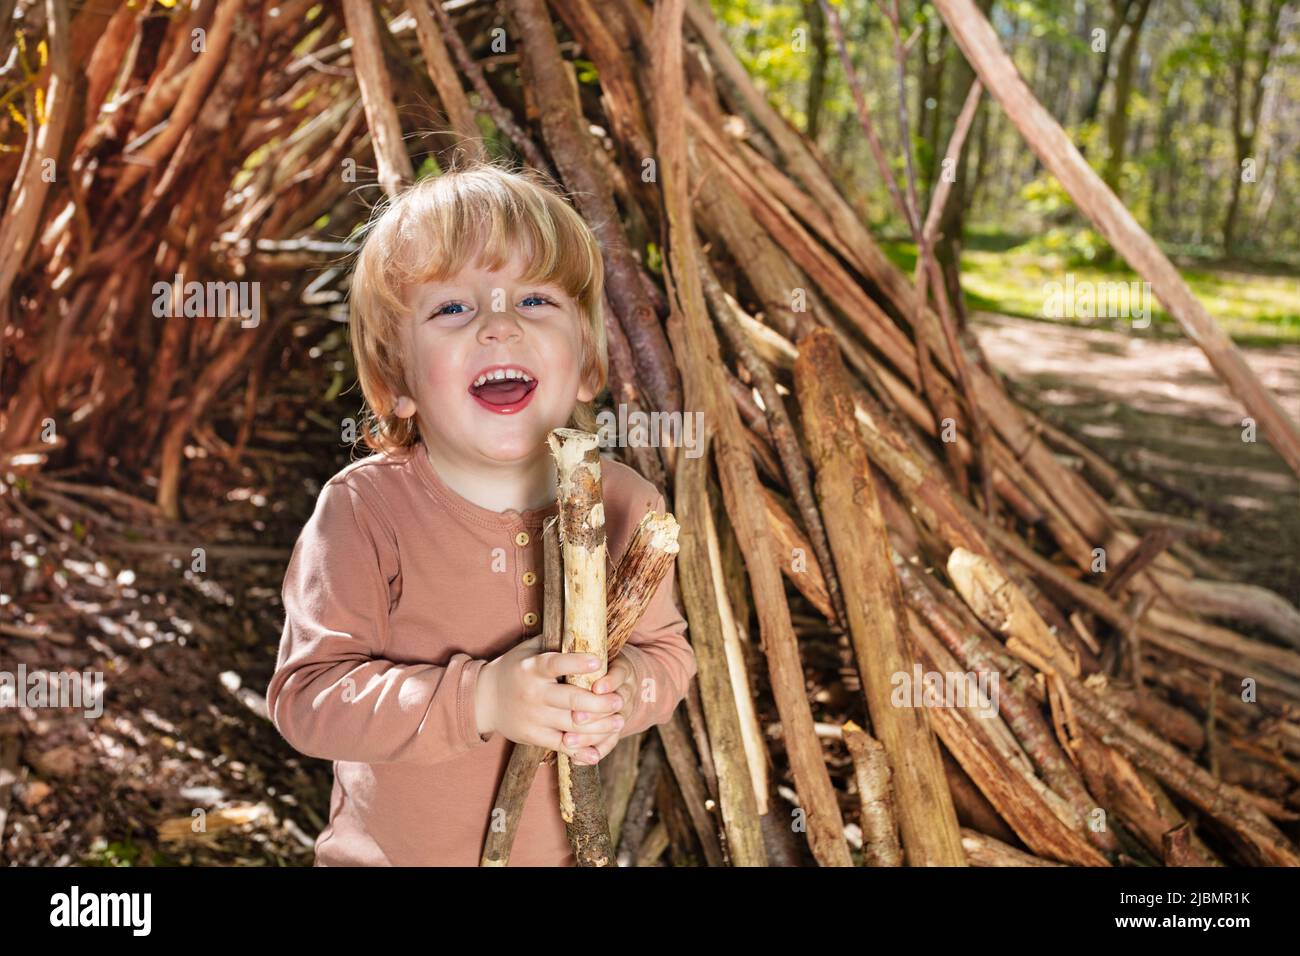 Boy play with brushwood in forest hut of branches, laughing Stock Photo